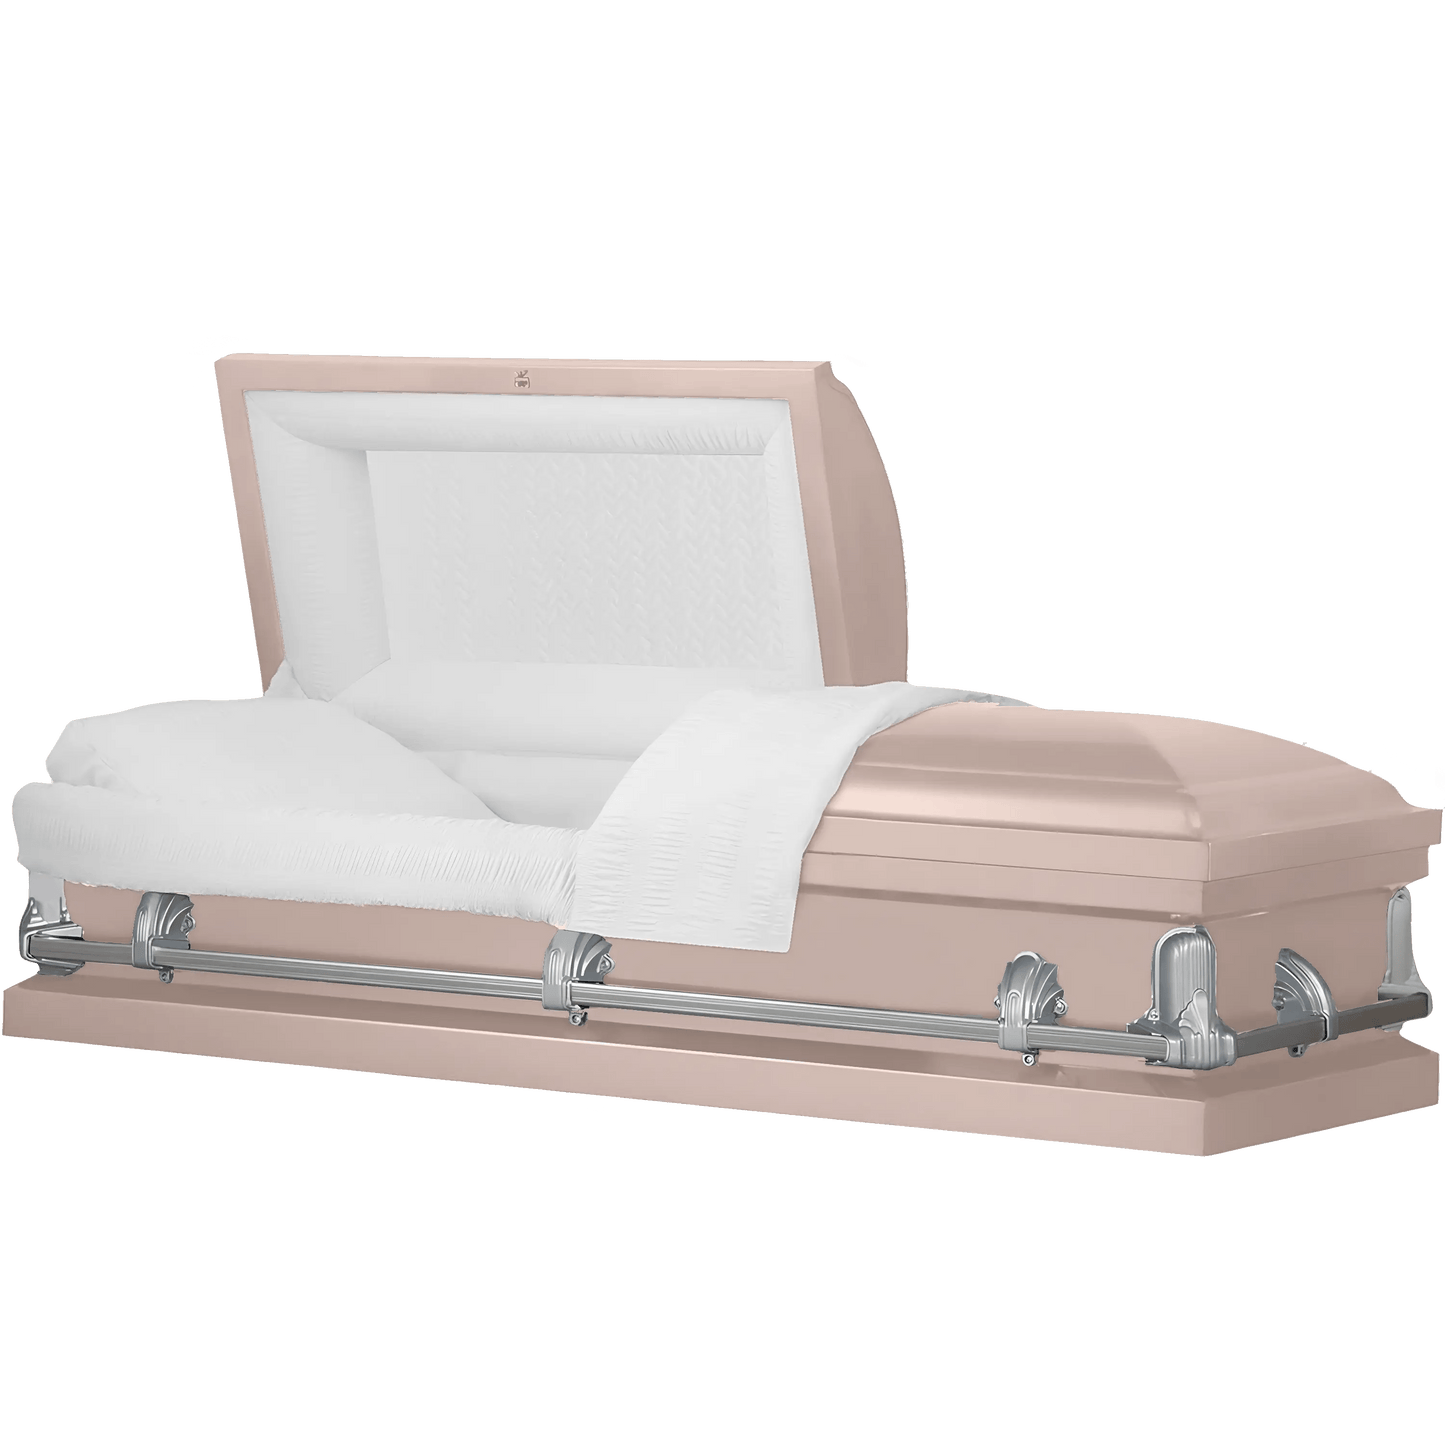 Andover Series | Pink Steel Casket with White Interior